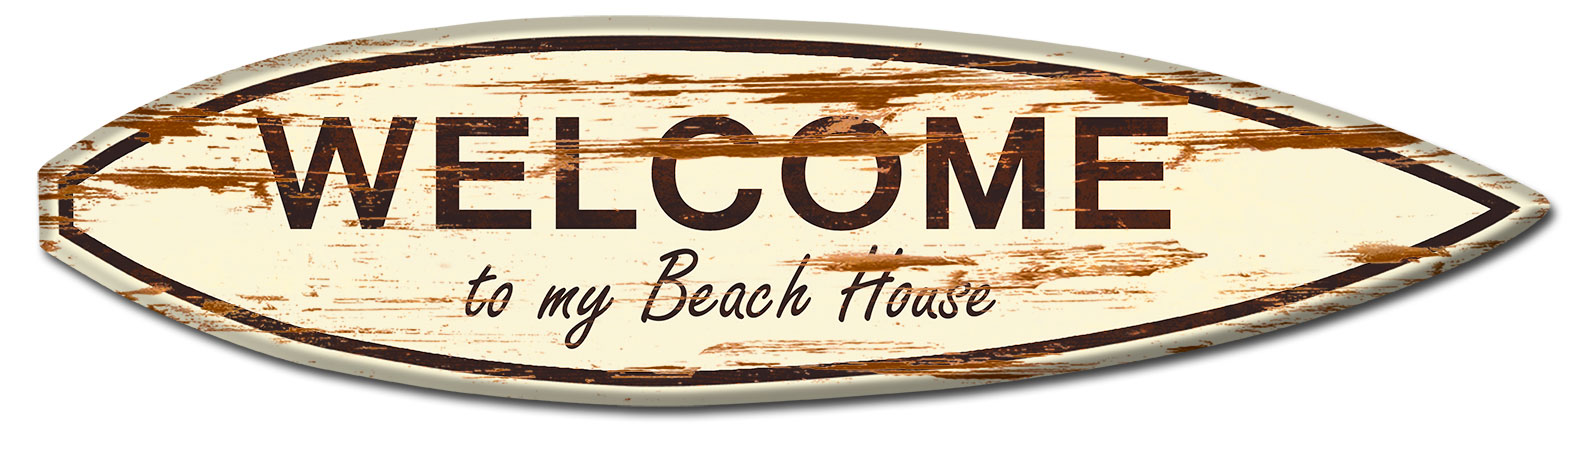 Welcome Beach House Surf Board Wood Print Vintage Sign